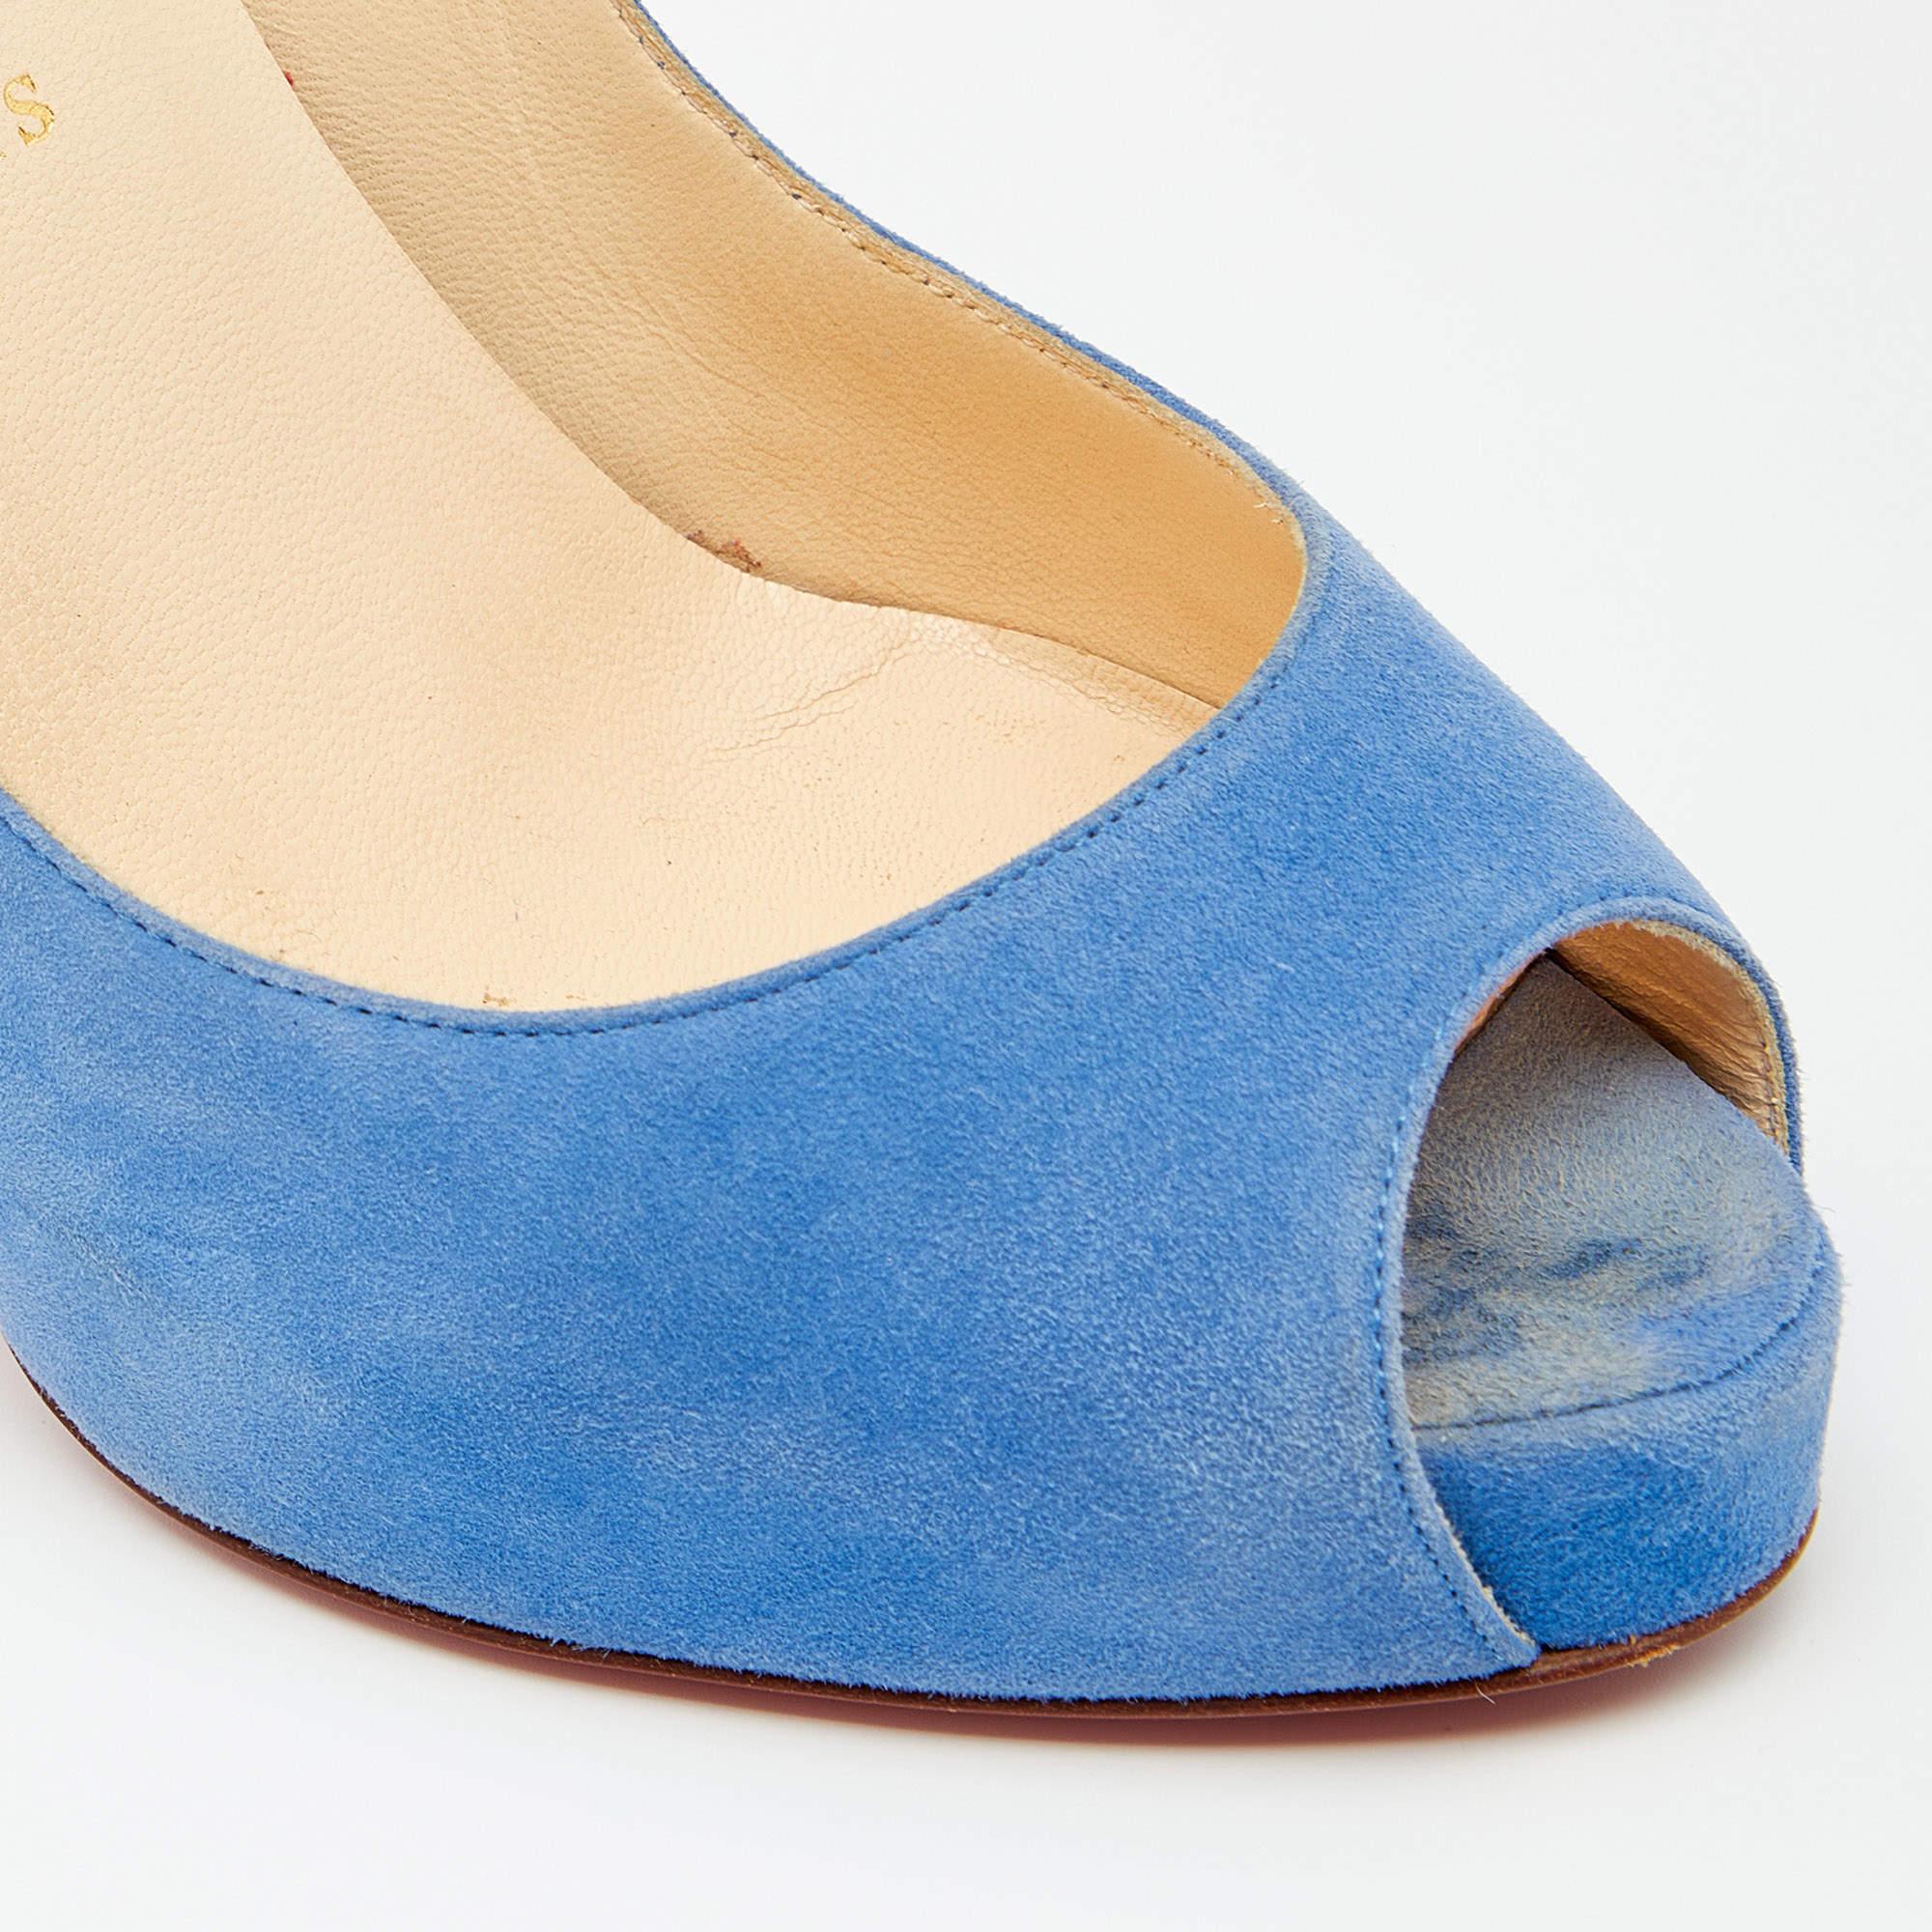 Christian Louboutin Blue Suede New Very Prive Peep Toe Pumps Size 36.5 For Sale 2